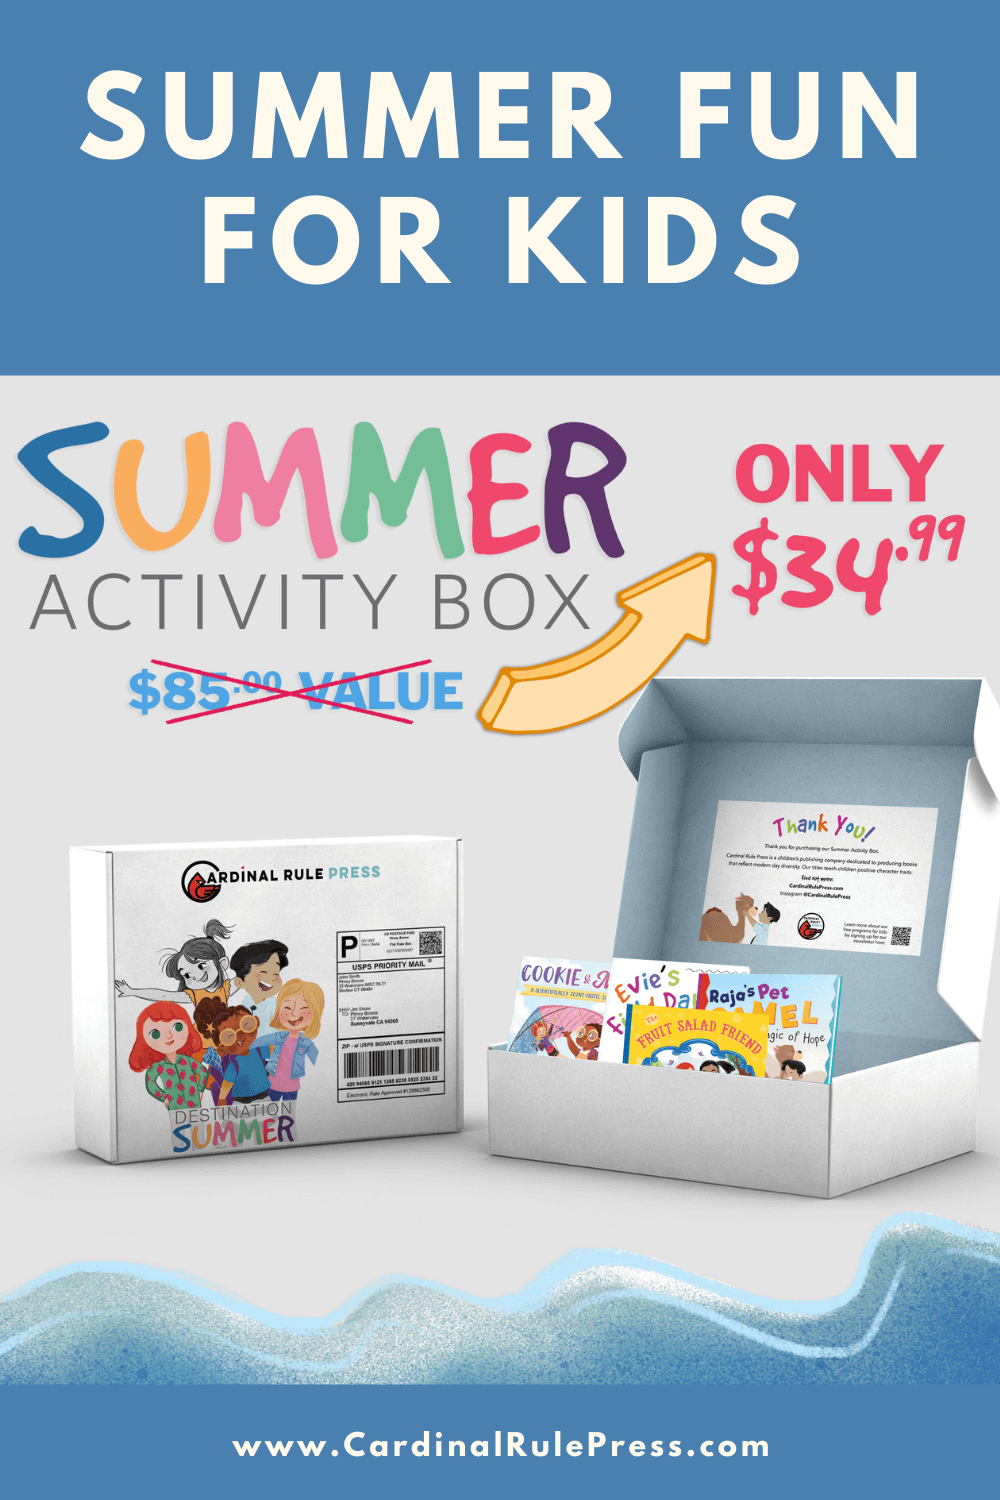 Summer Fun for Kids. Keep the learning and emotional growth going throughout summer! Purchase here: https://gum.co/wOoKe while supplies last. #Summer #PictureBooks #SummerReading